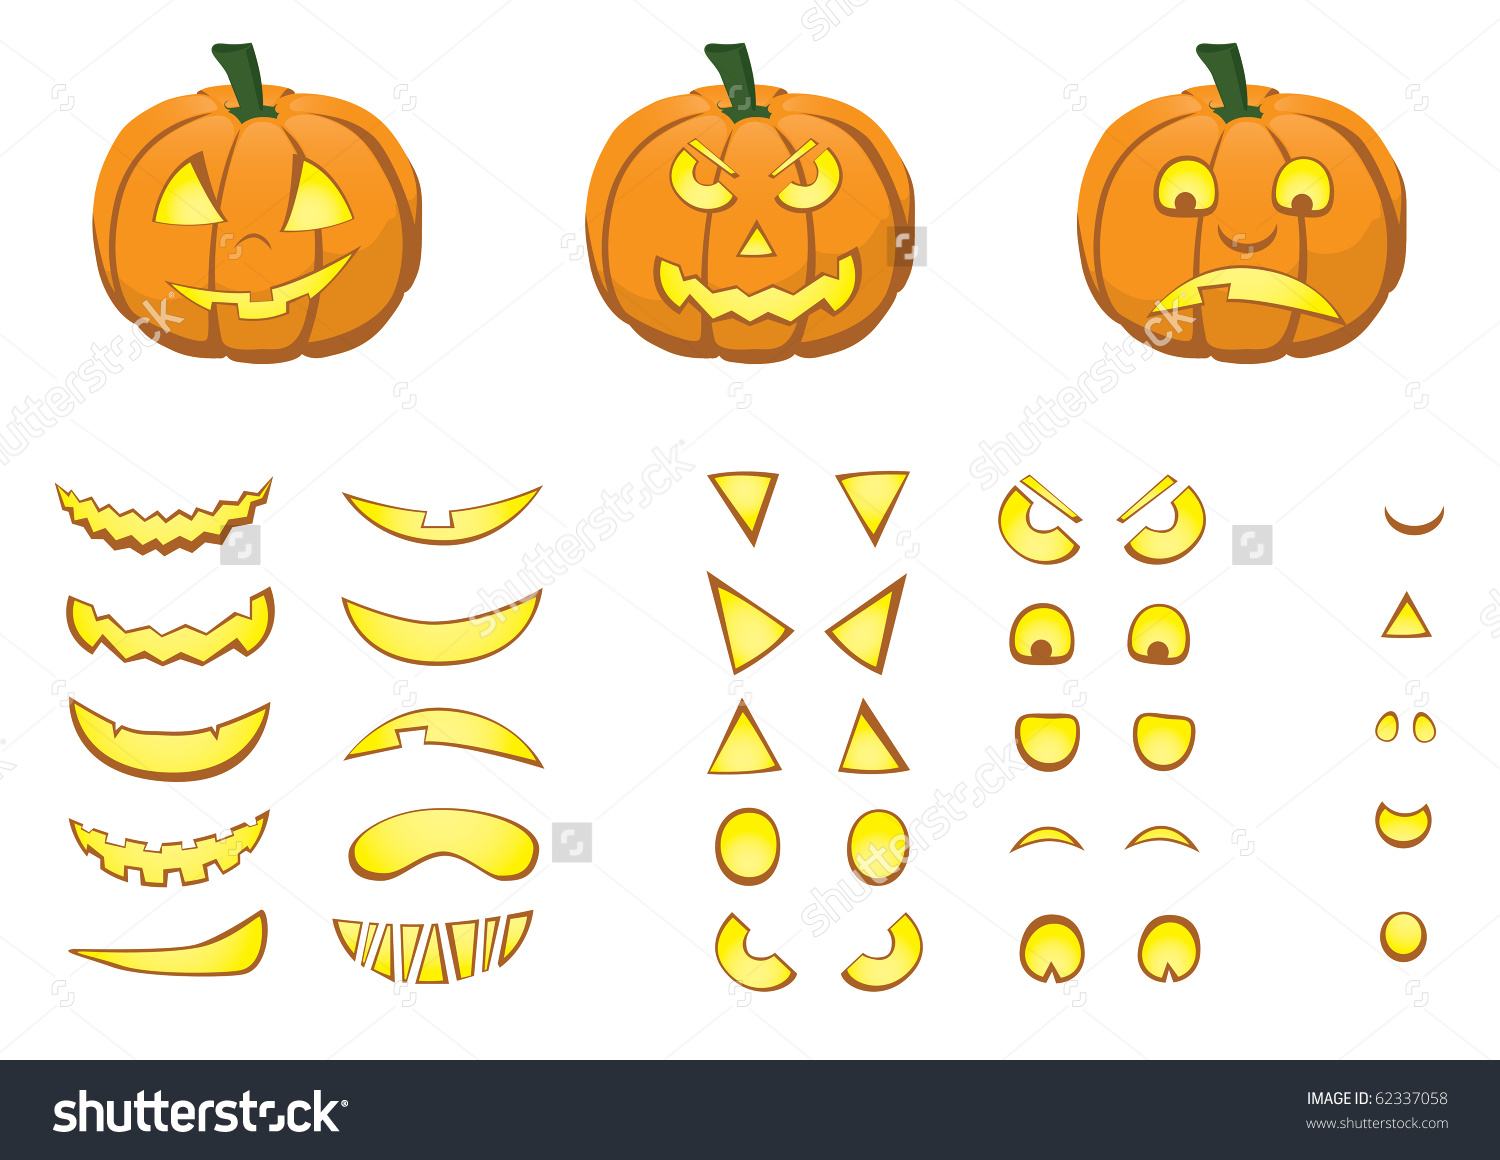 A Jack O'Lantern Pumpkin With Over 500 Combinations On Mouth, Eyes.